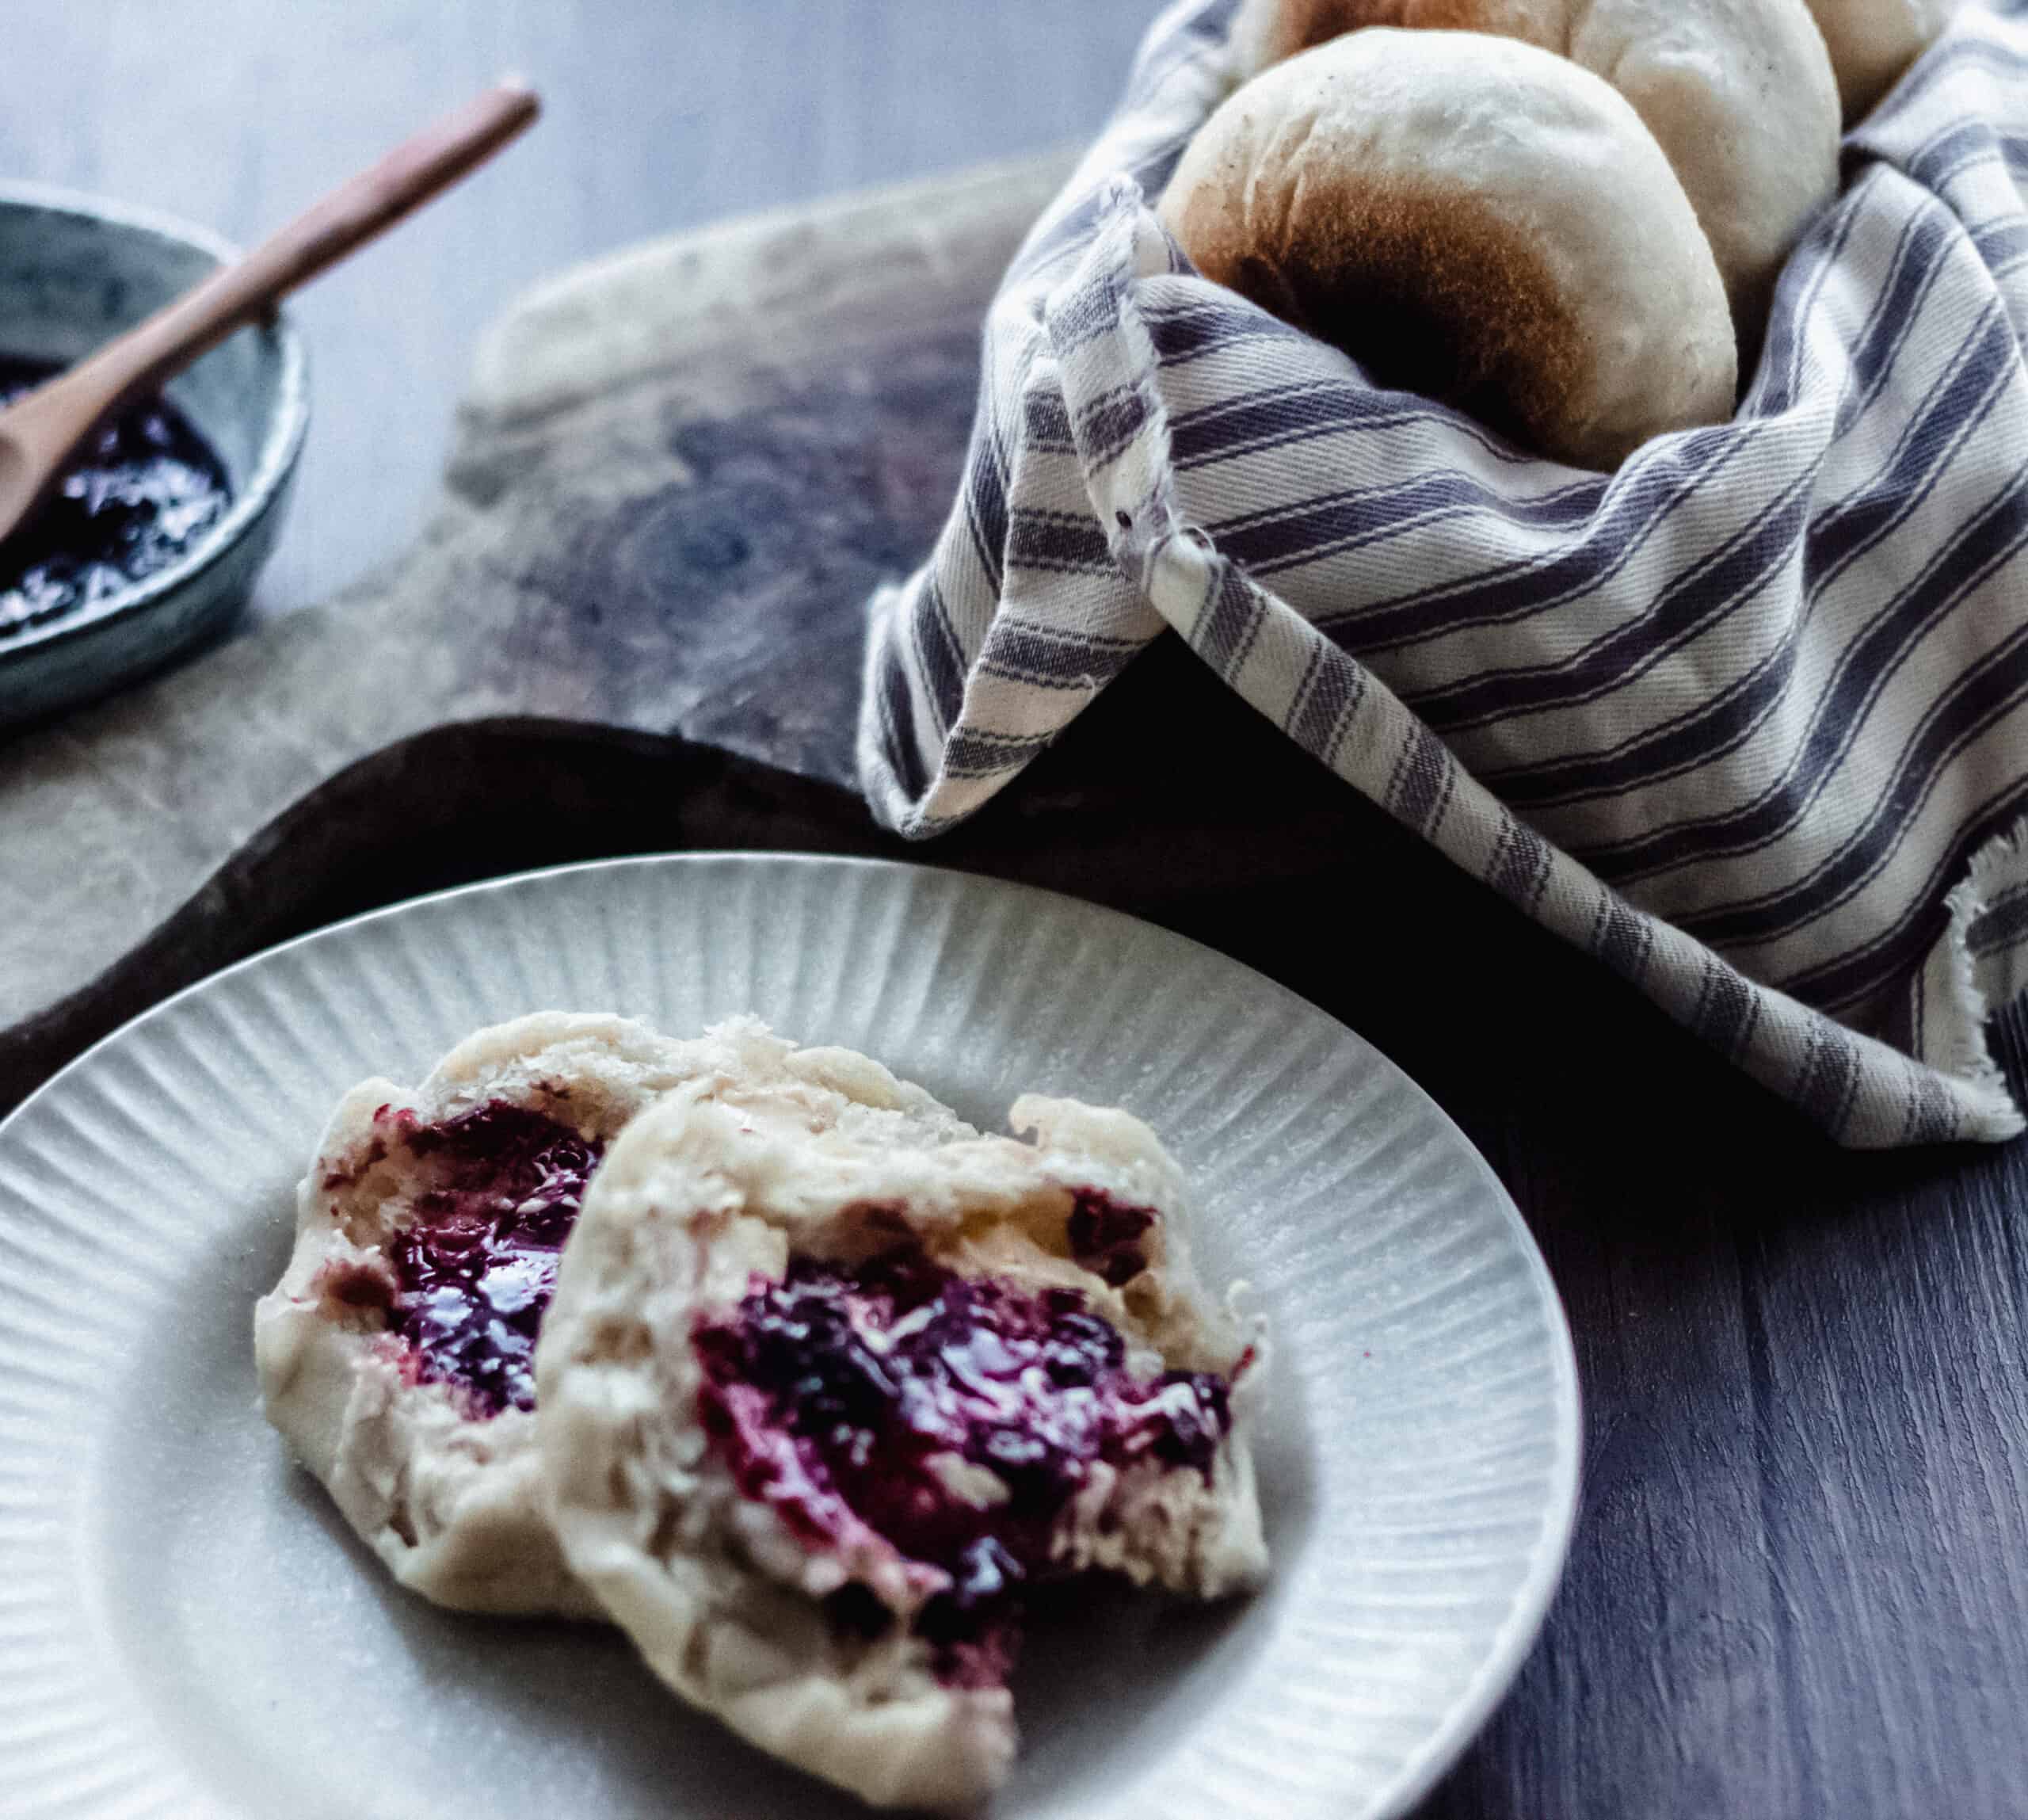 English muffins with jam